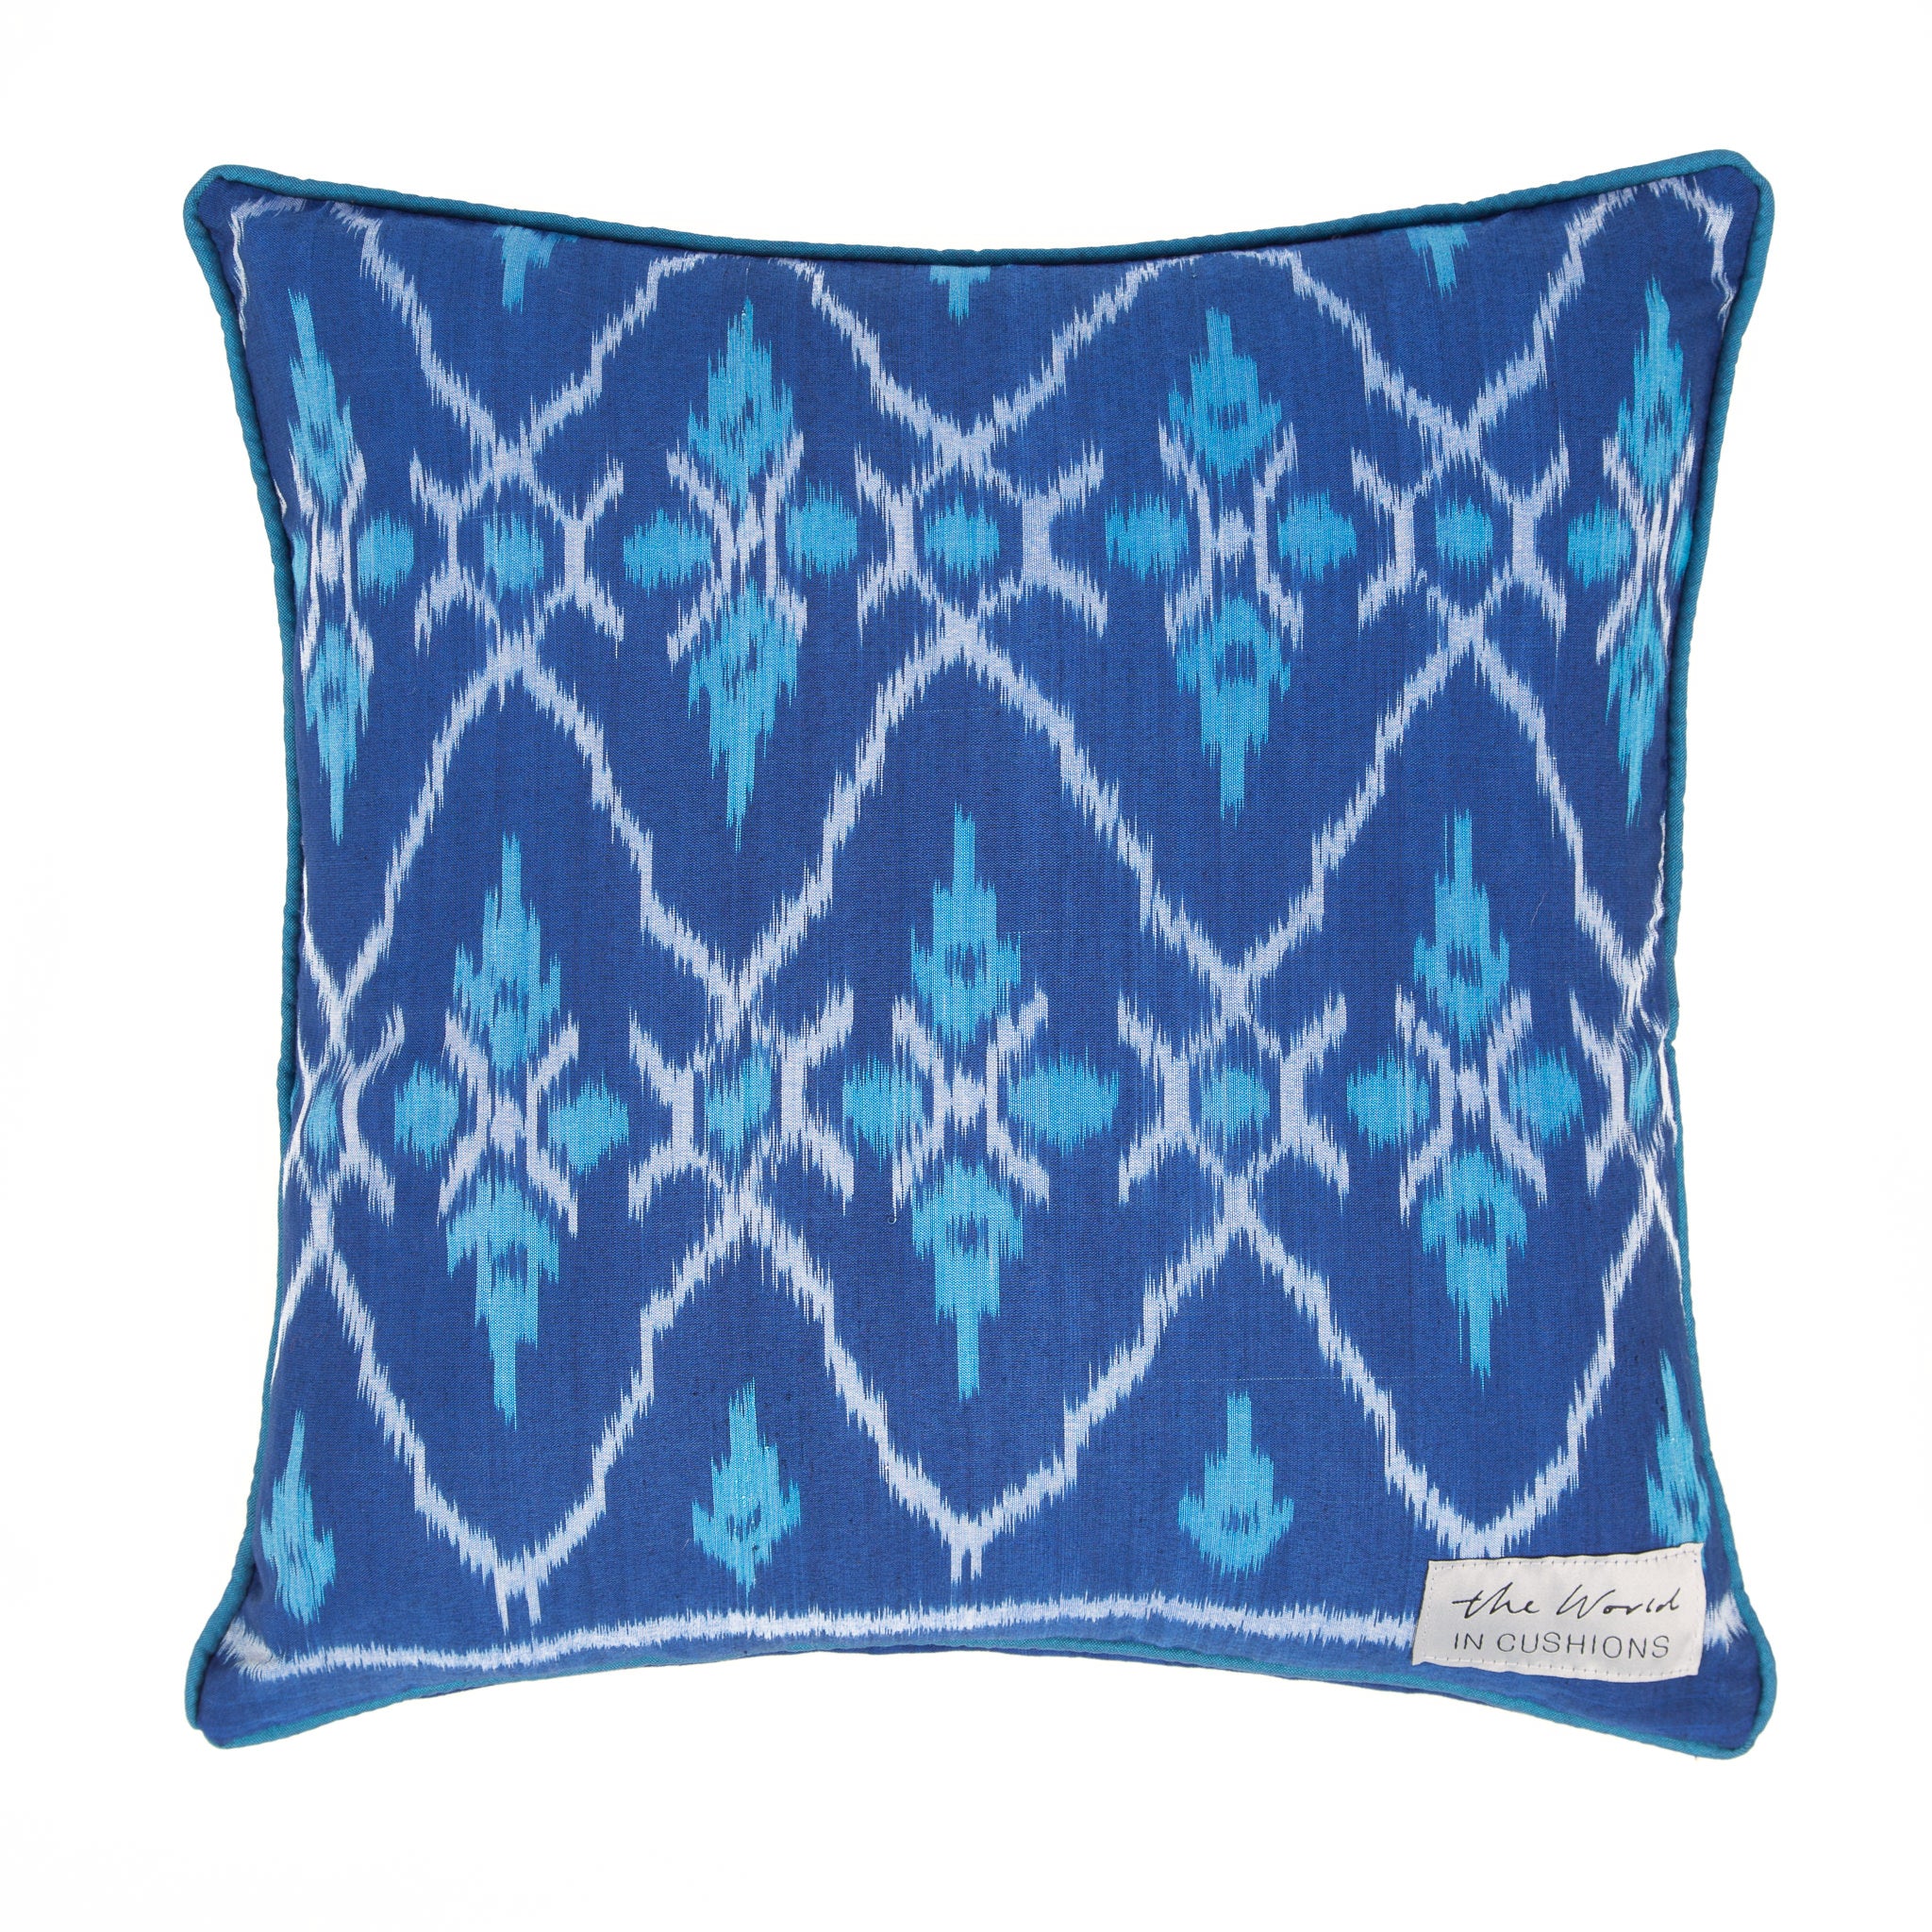 Blue & Turquoise Square / Scatter Ikat Cushion from Bali - BACK